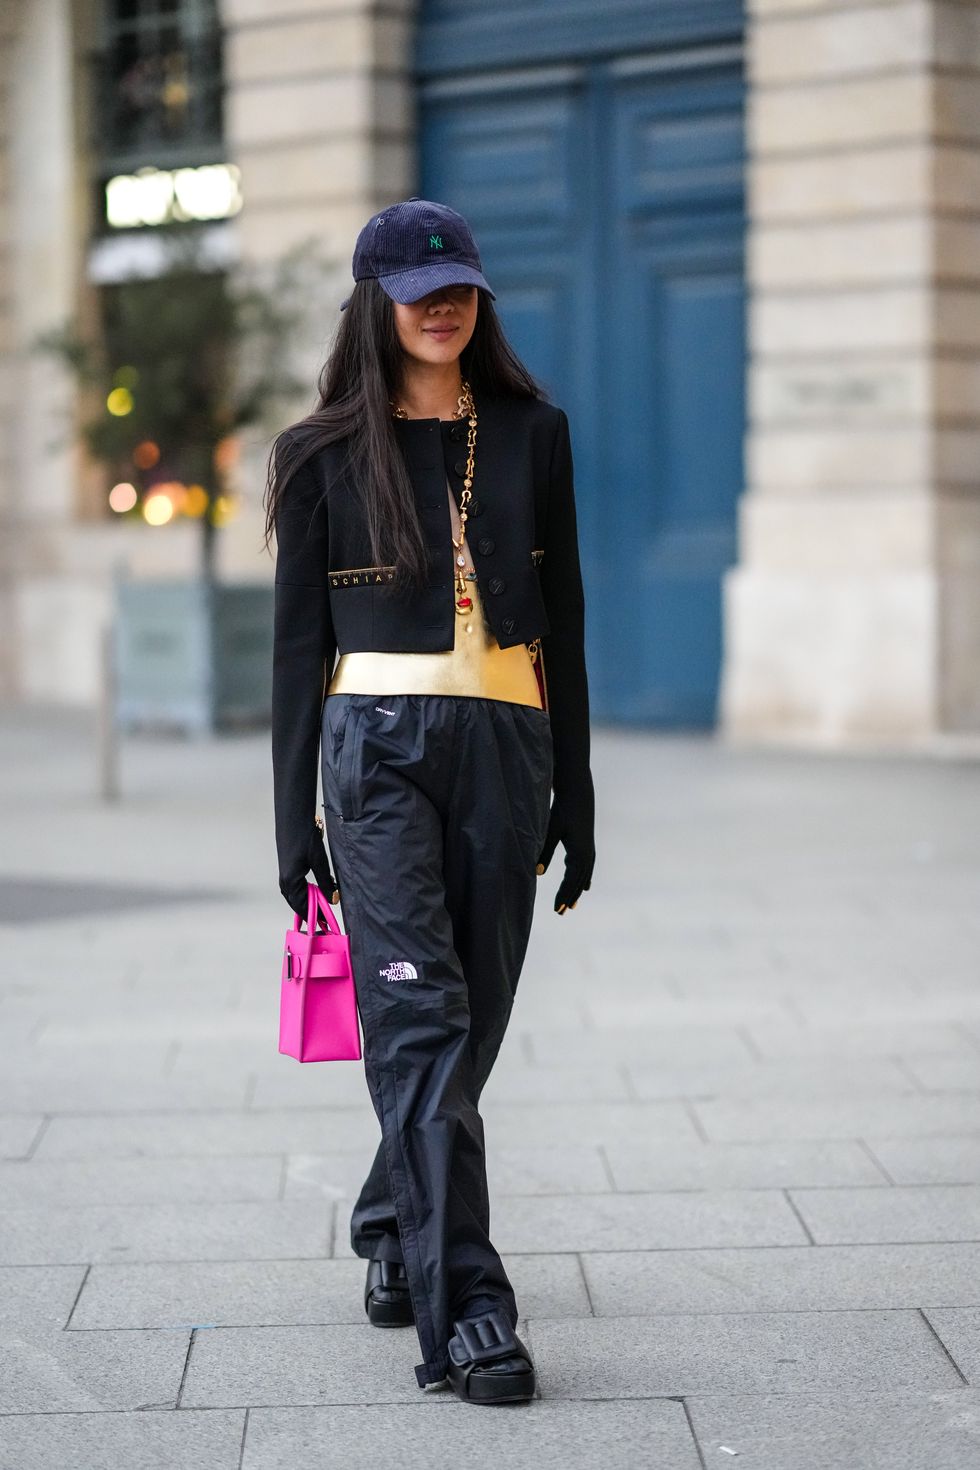 paris, france march 06 a guest wears a navy blue ribbed velvet cap from new era, a gold and rhinestones long pendant necklace from schiaparelli, a gold shiny leather with embroidered gold jewel corset from schiaparelli, a black cropped jacket from schiaparelli, black gloves from schiaparelli, a pink shiny leather handbag, black large pants from the north face, black shiny leather with buckle on the toe cap shoes, outside schiaparelli, during paris fashion week womenswear fw 2022 2023, on march 06, 2022 in paris, france photo by edward berthelotgetty images